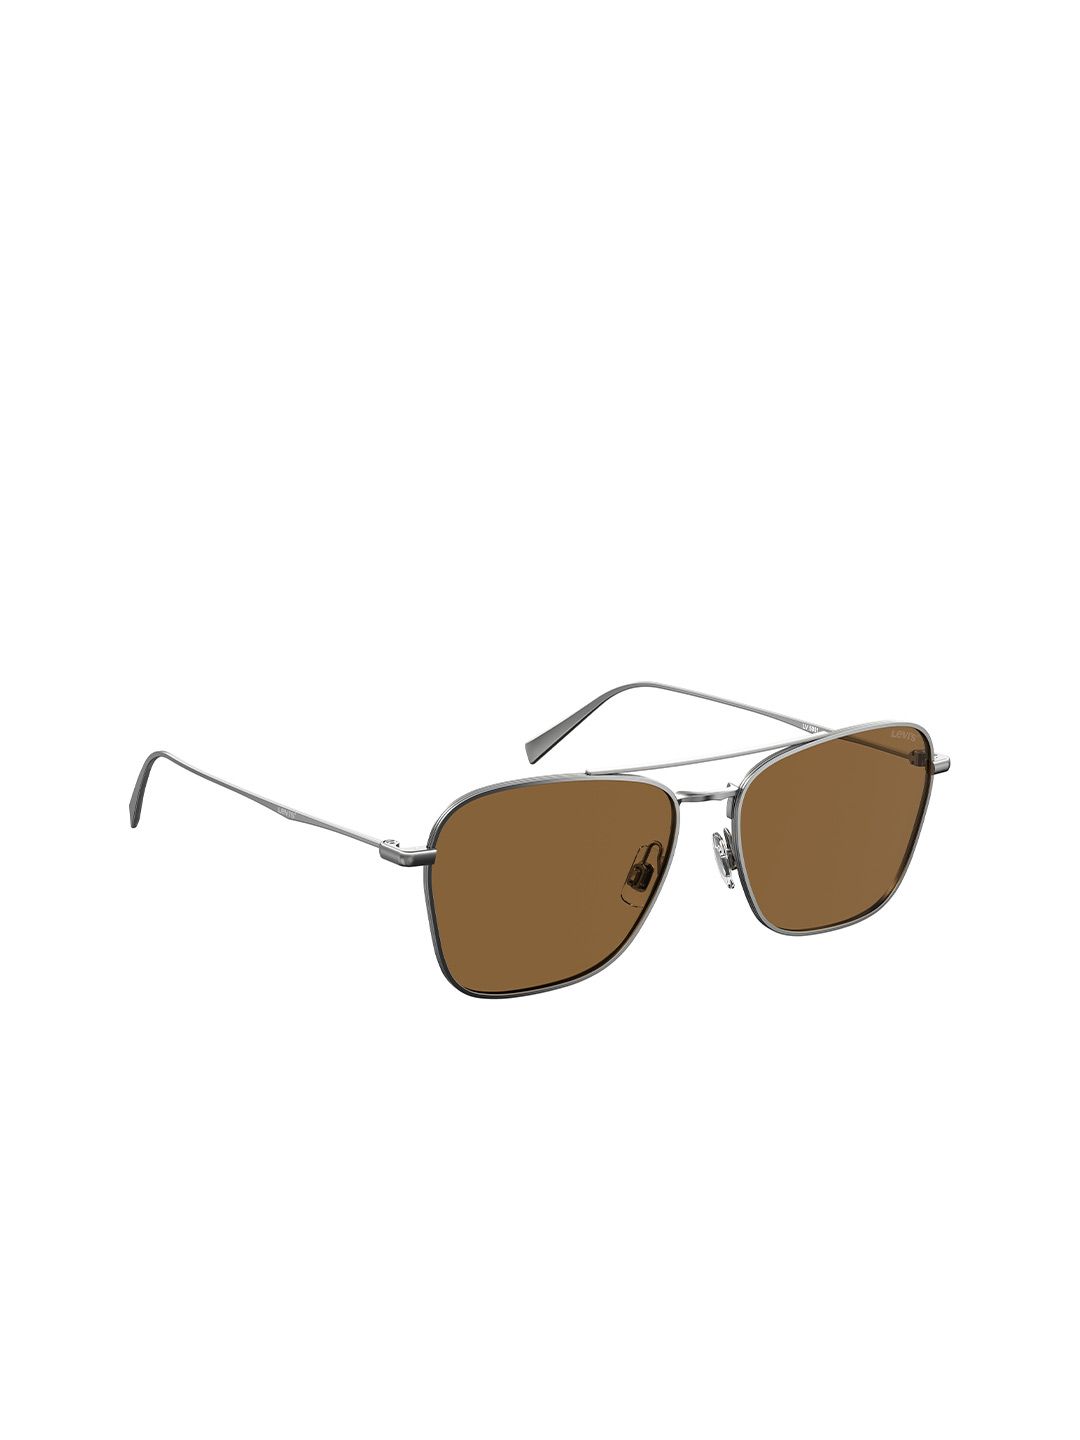 Levis Unisex Brown Lens & Steel-Toned UV Protected Square Sunglasses LV 5001/S 6LB 5870 Price in India